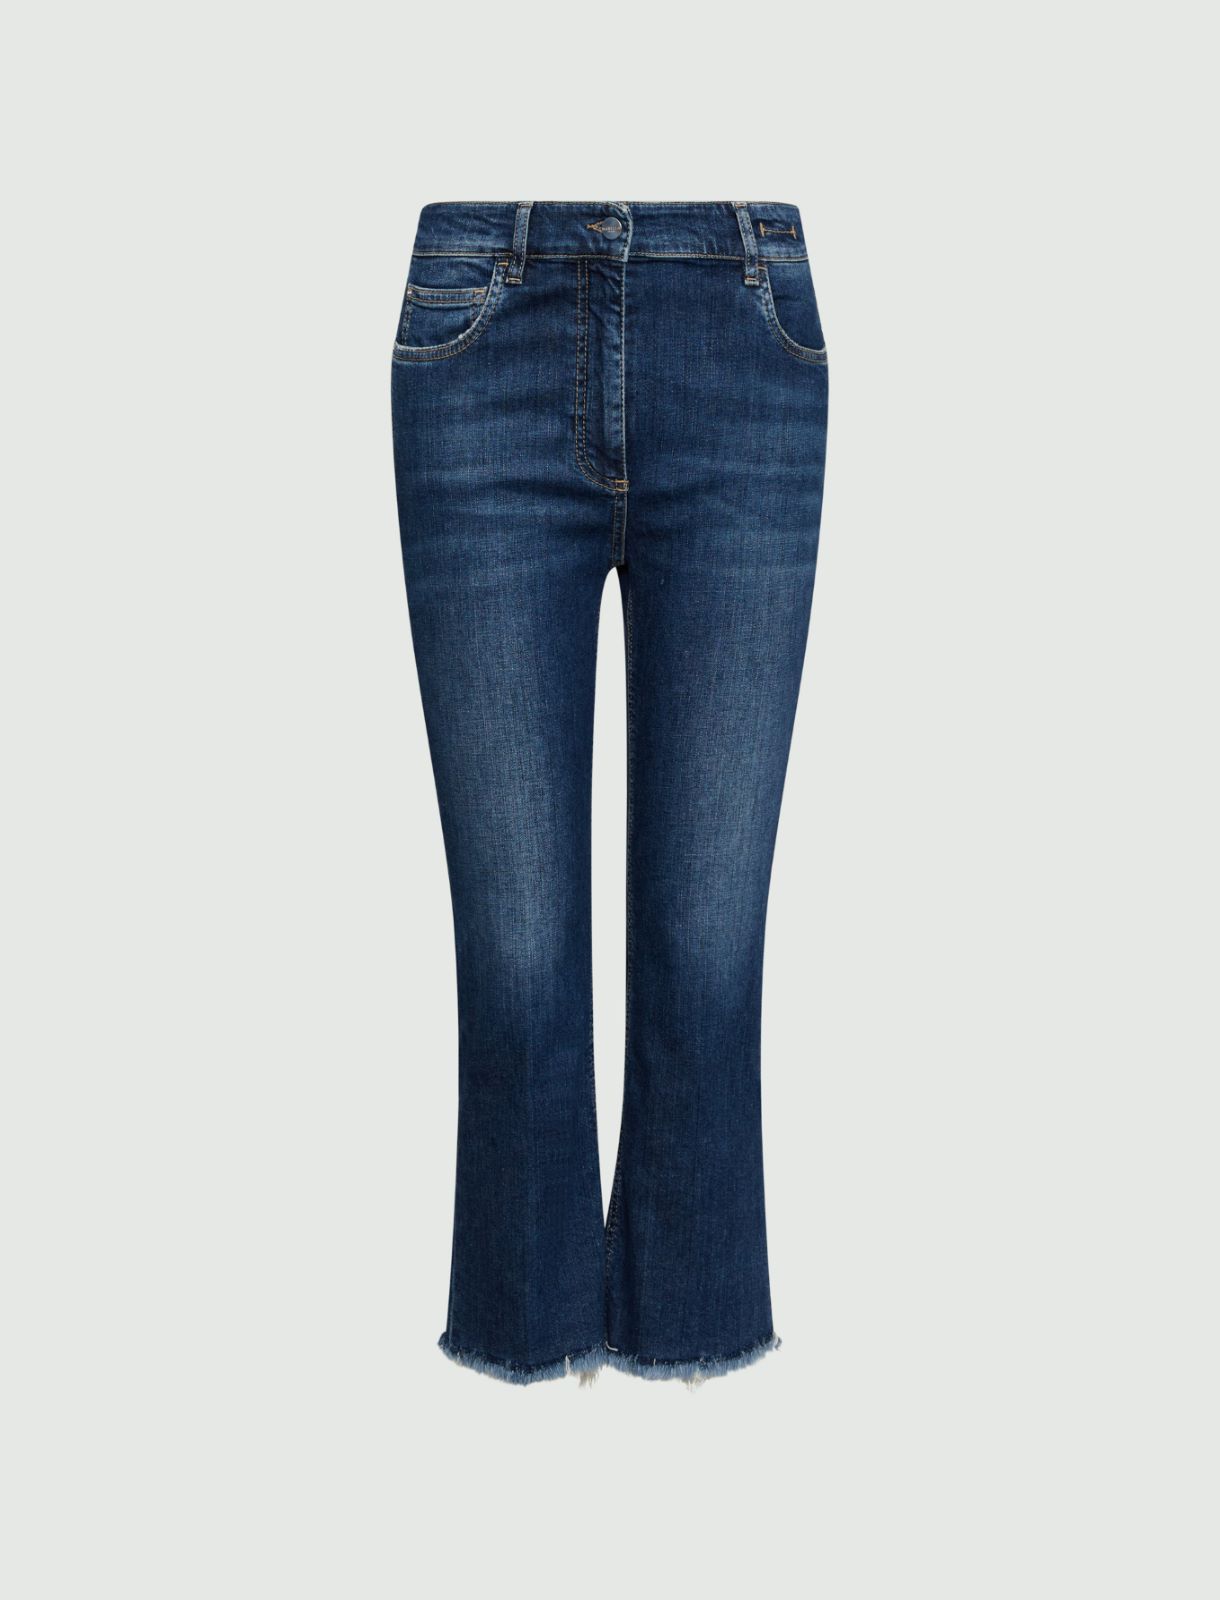 Jeans flare - Blue jeans - Marella - 6